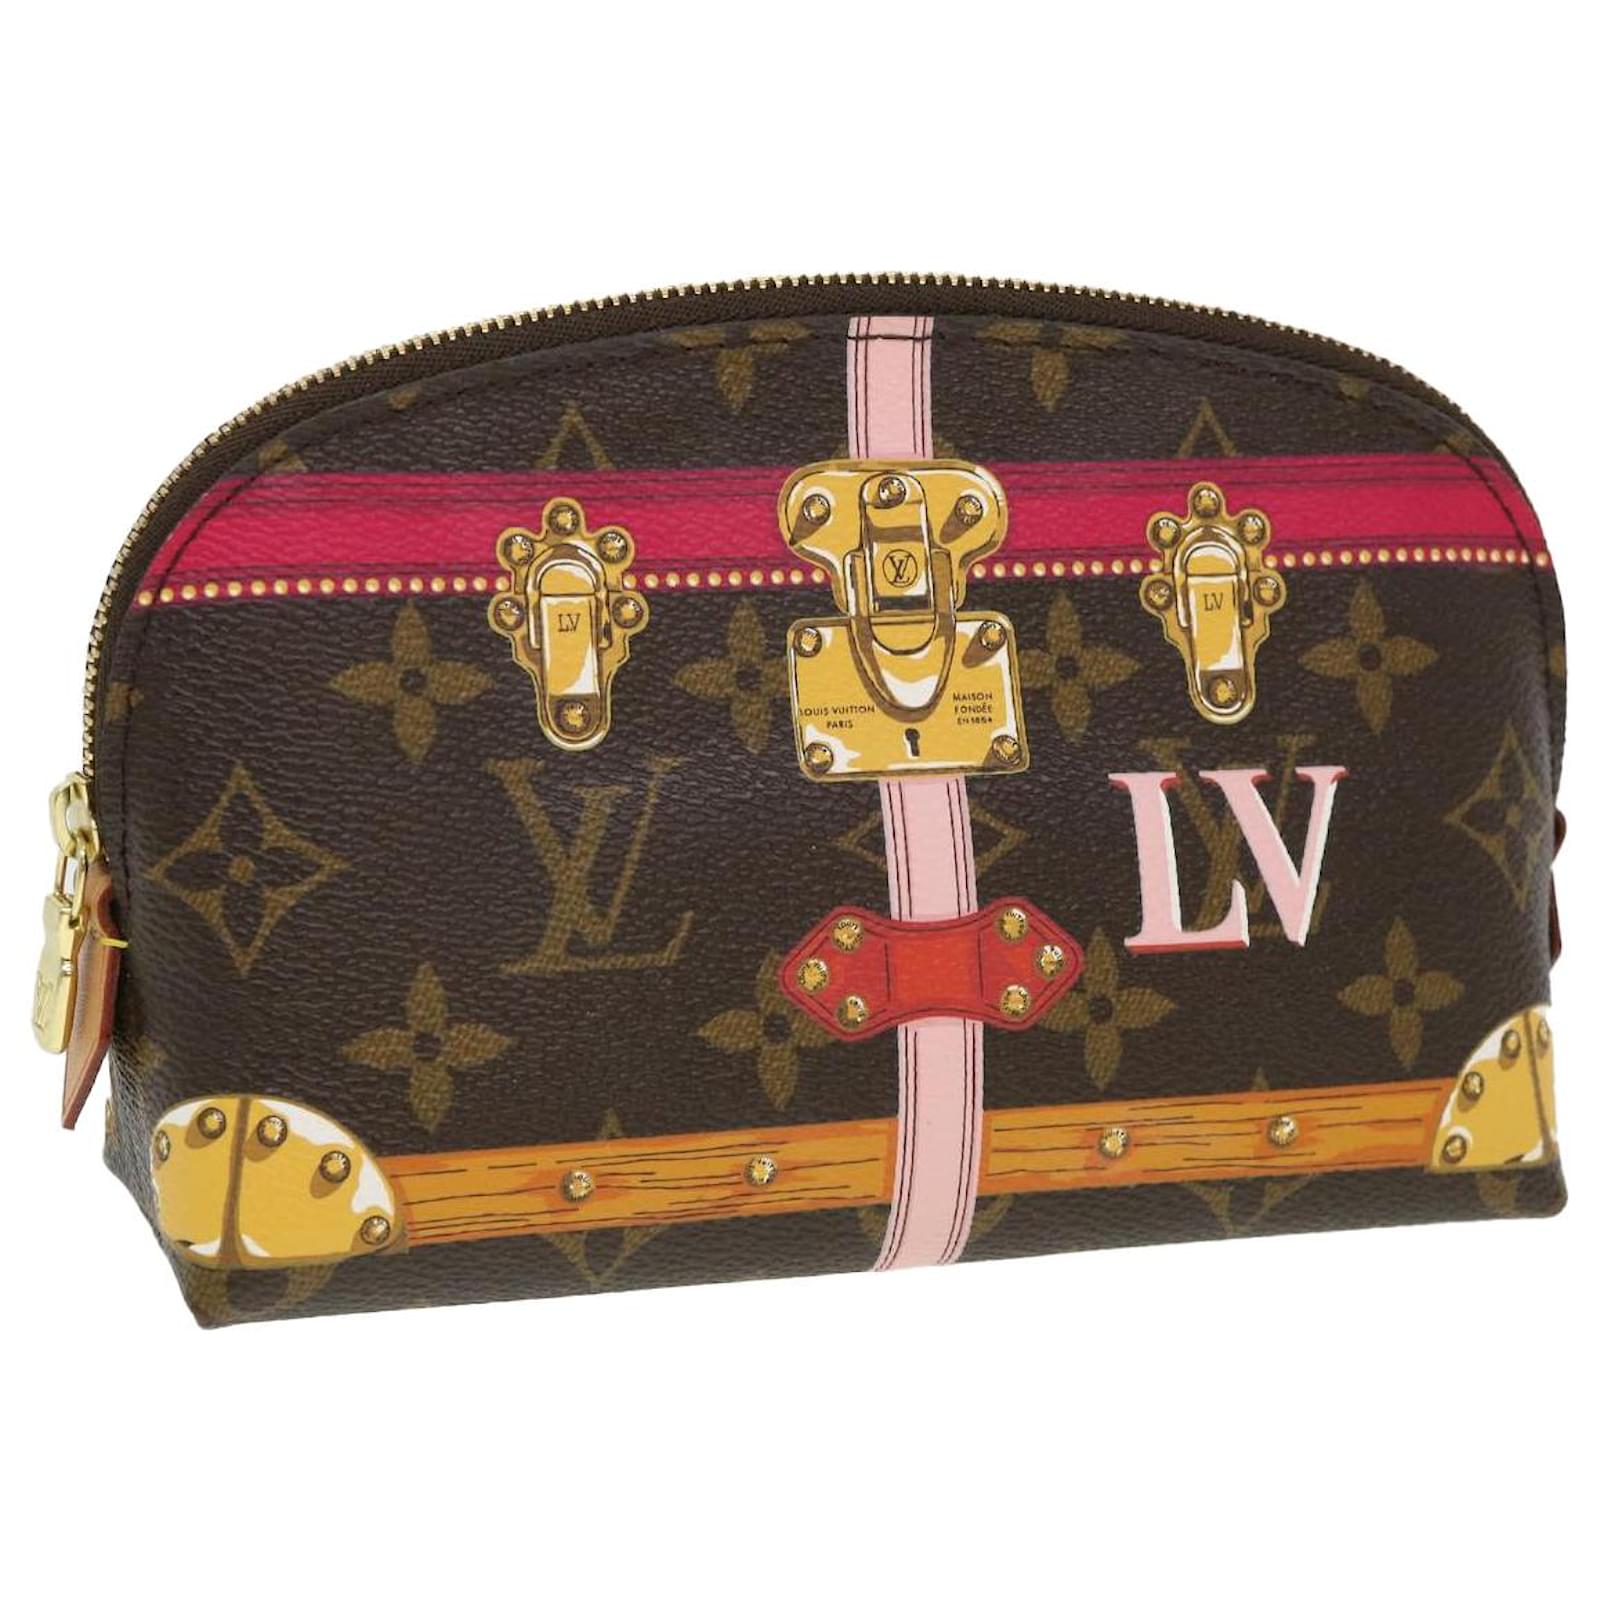 BRAND NEW!! AUTH MADE IN FRANCE Louis Vuitton Cosmetic Pouch PM